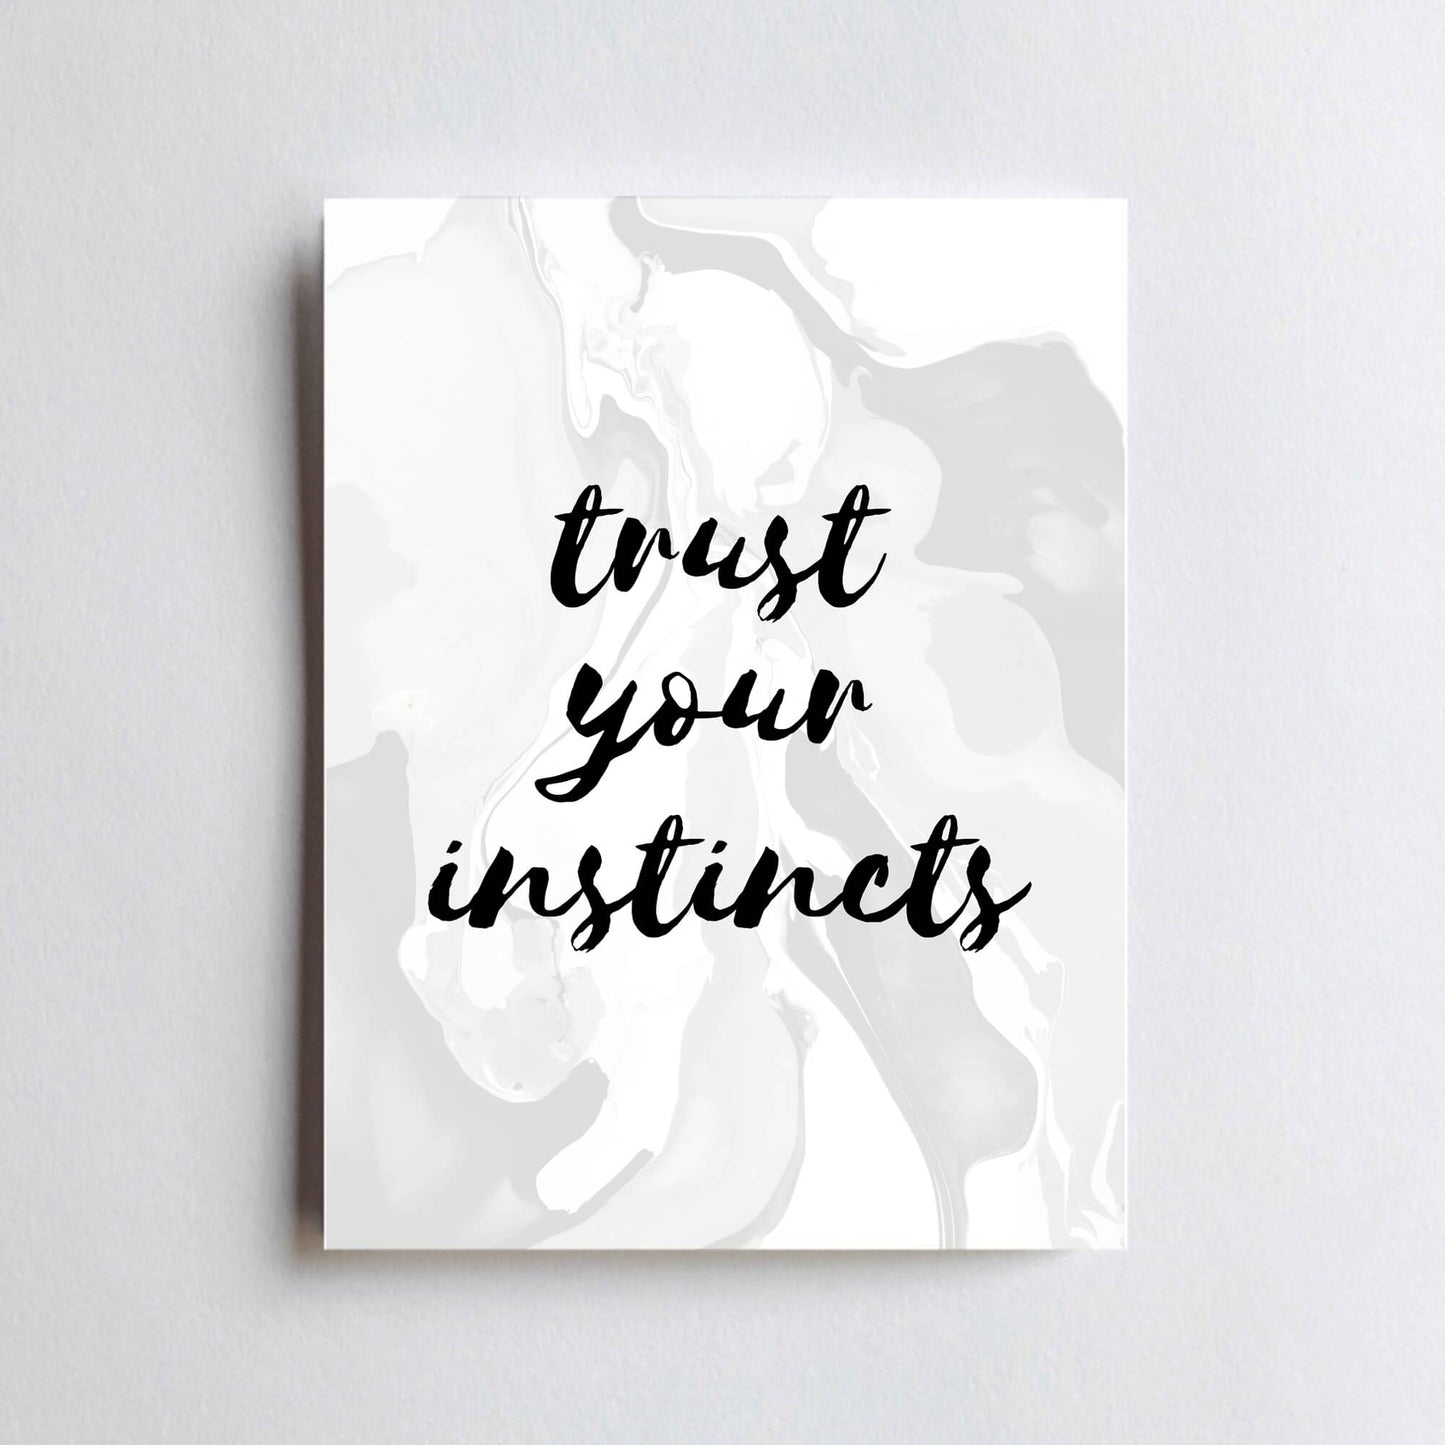 Trust Your Instincts Poster by SixElevenCreations. Product Code SEP0302